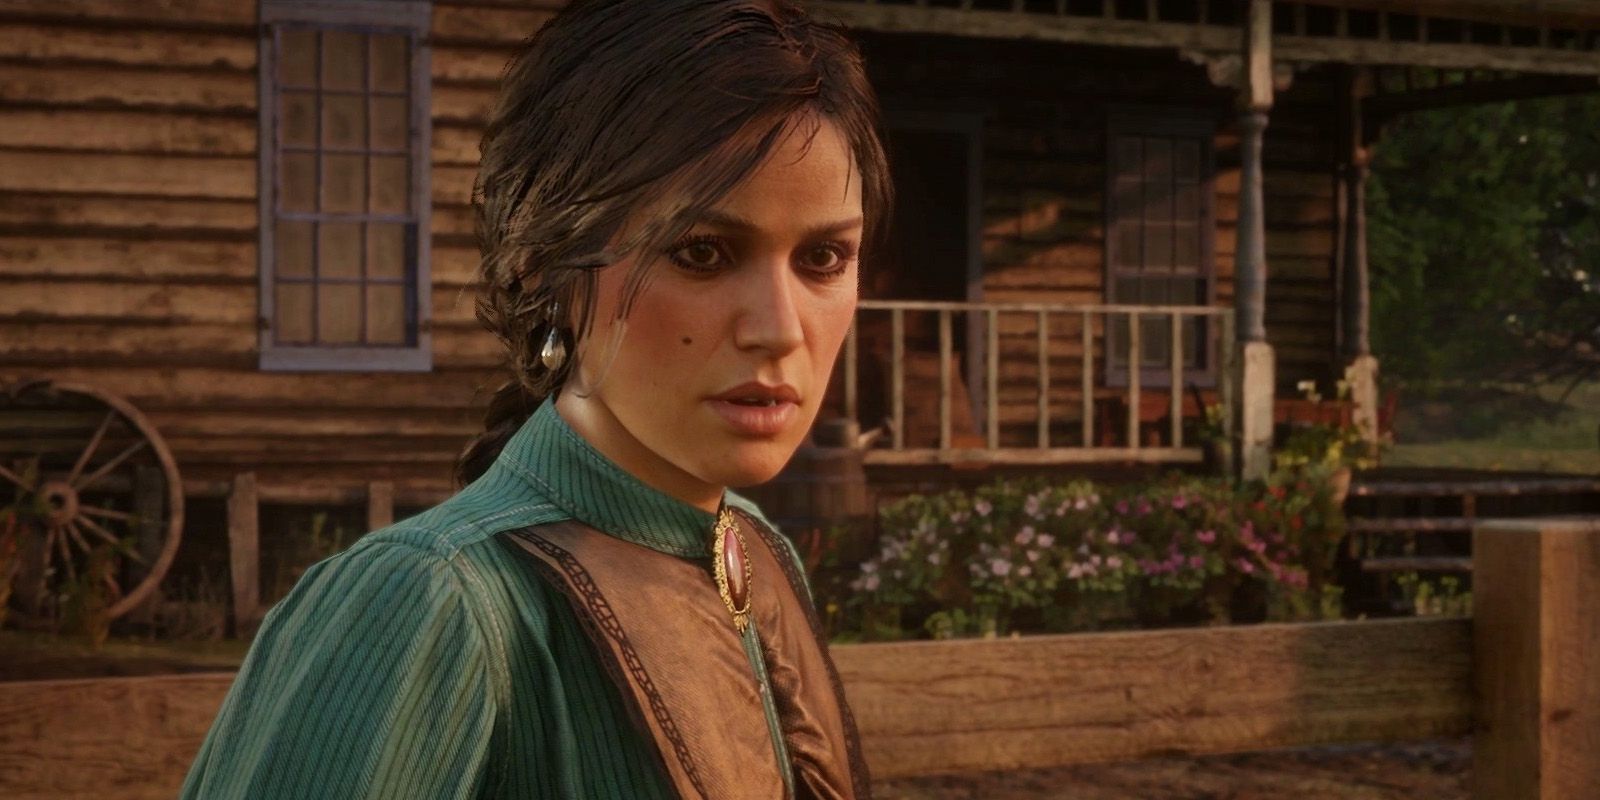 The way that Arthur treats Mary in Red Dead 2 is pretty terrible